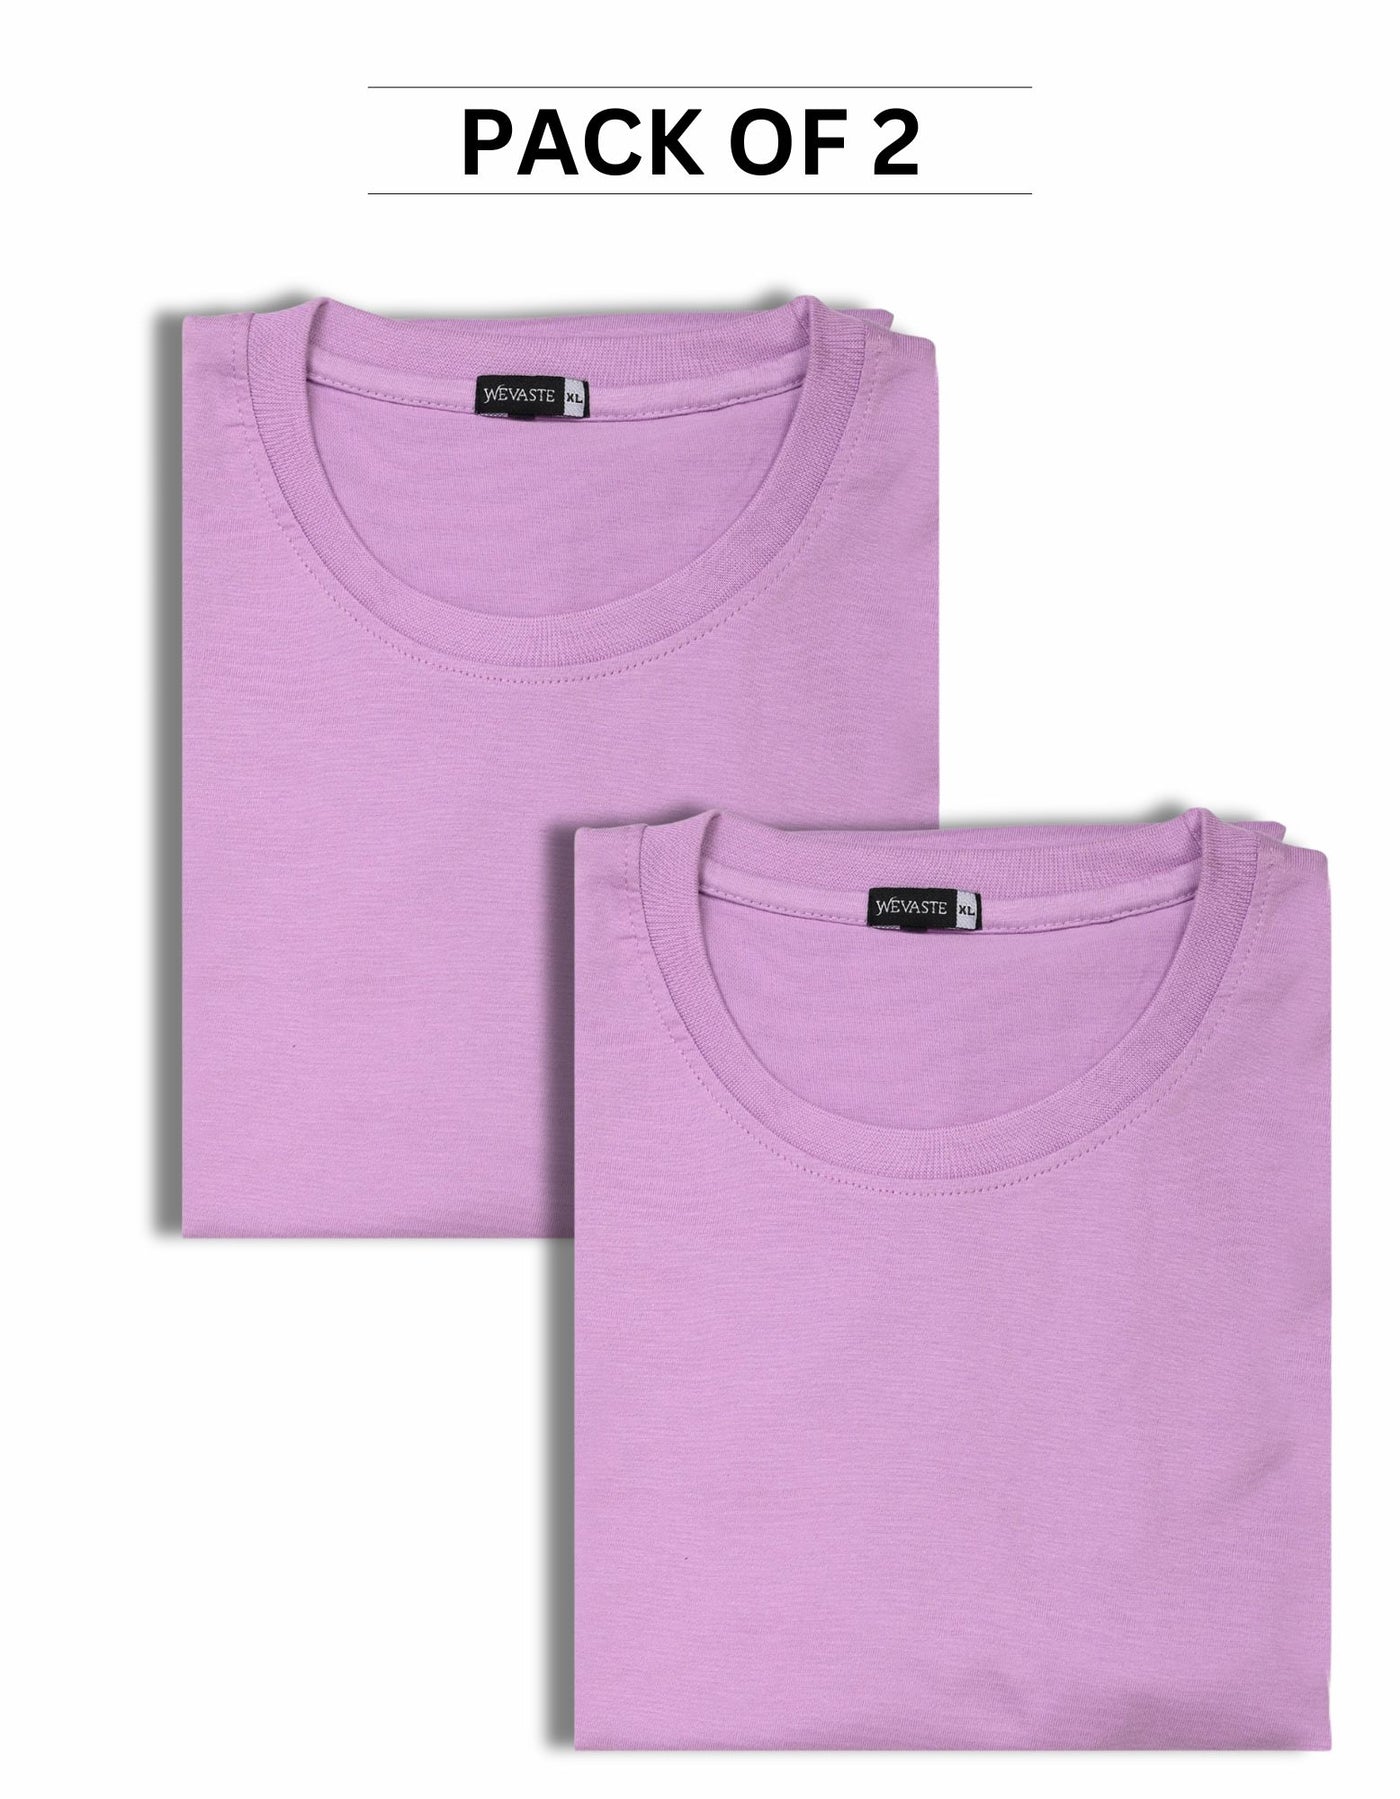 Lavender Pack Of 2 T-shirts